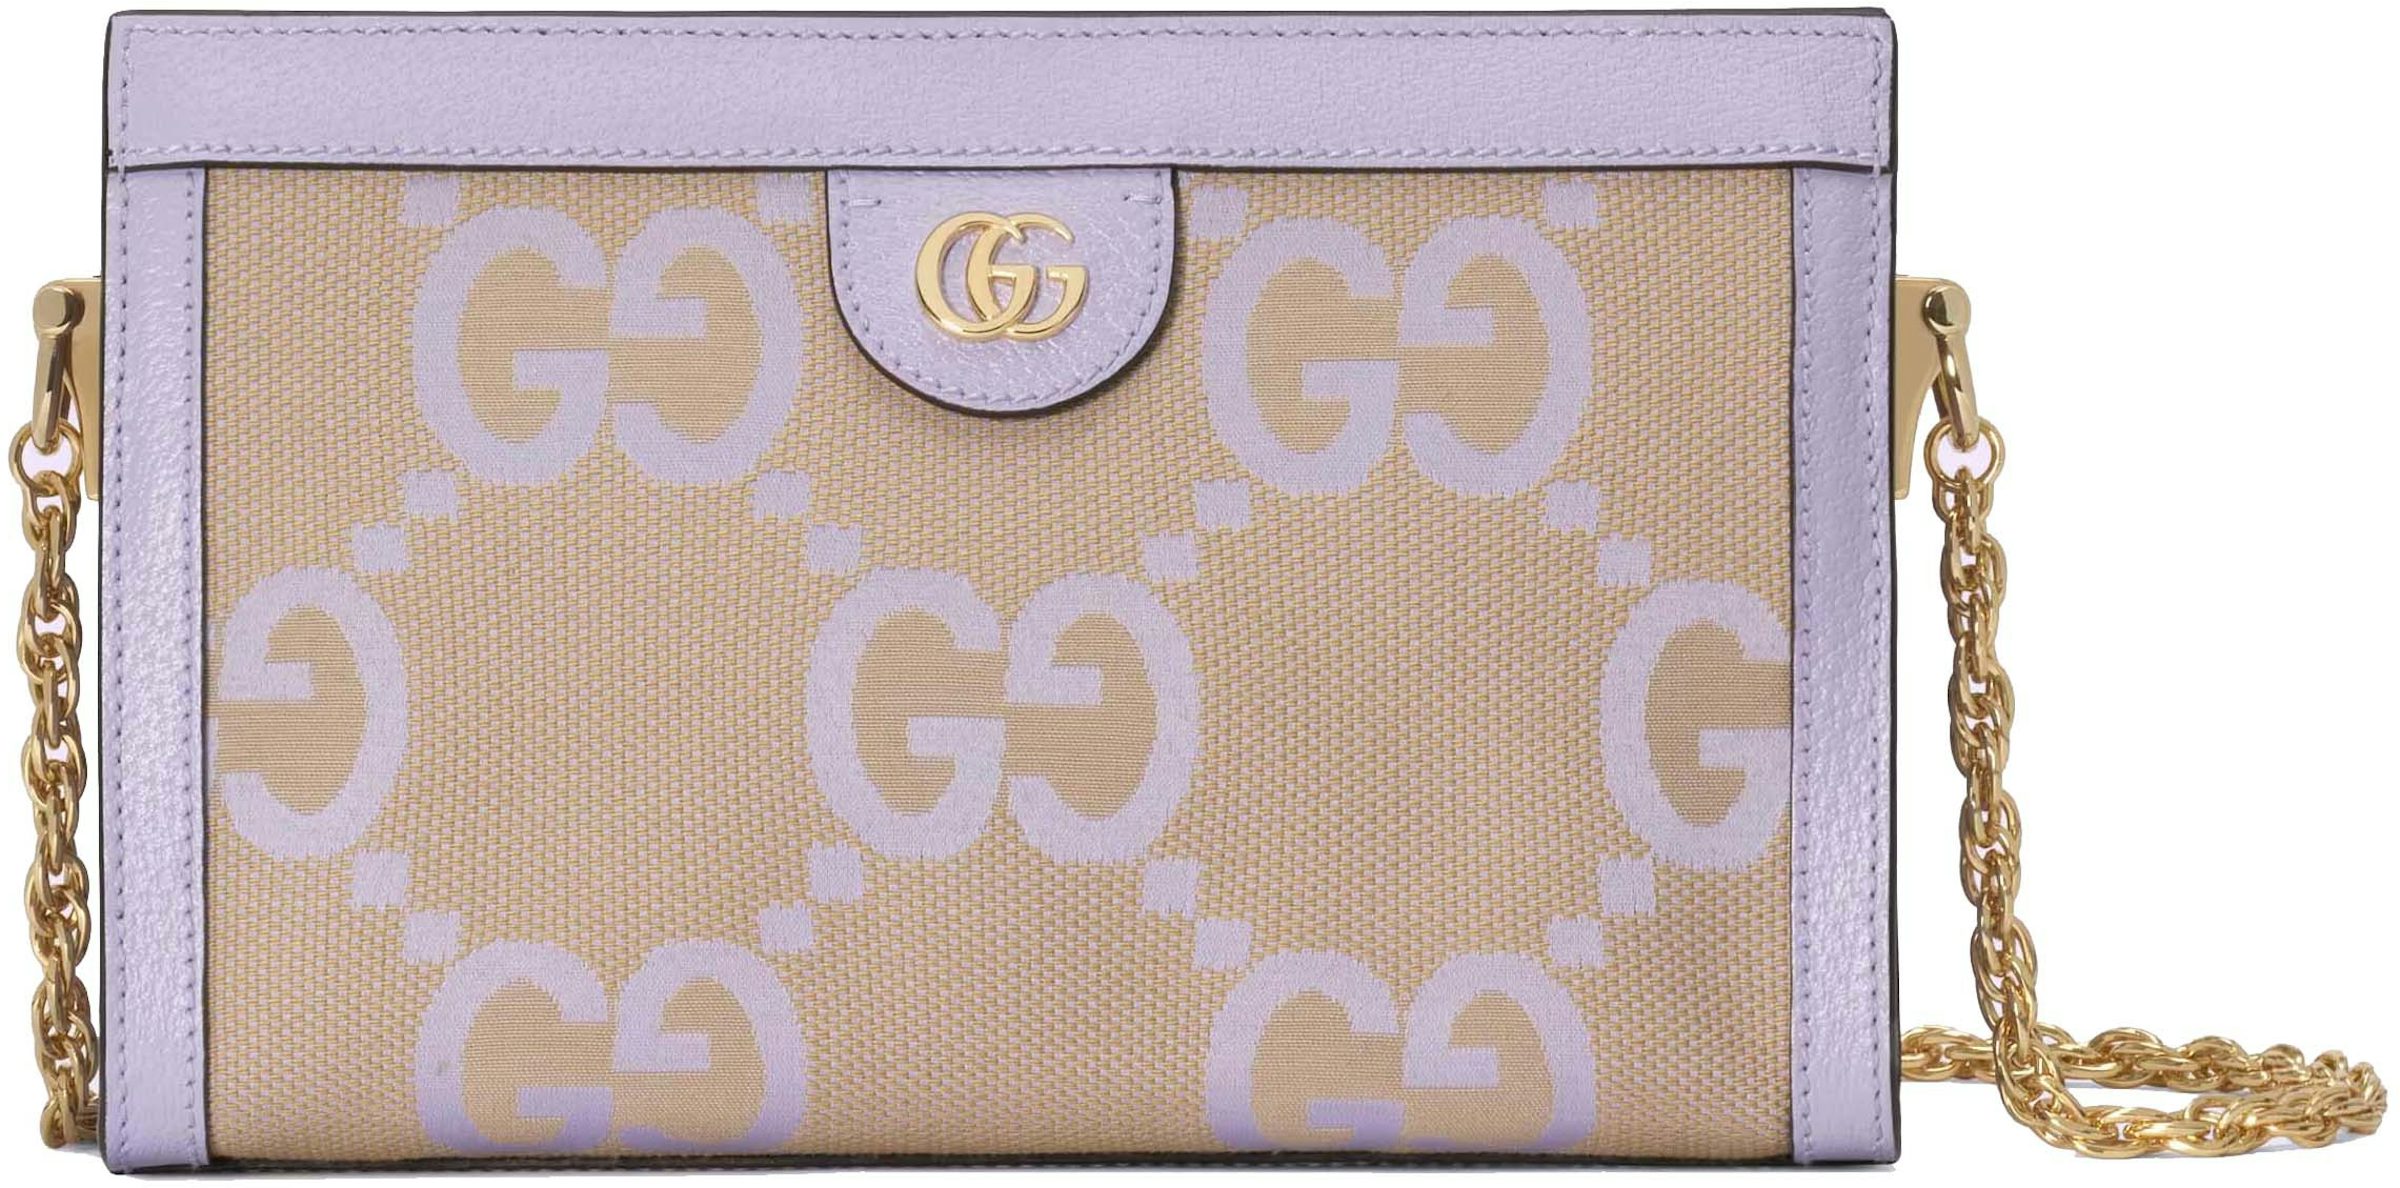 Gucci Ophidia Jumbo GG Small Shoulder Bag Camel/Lilac in Canvas